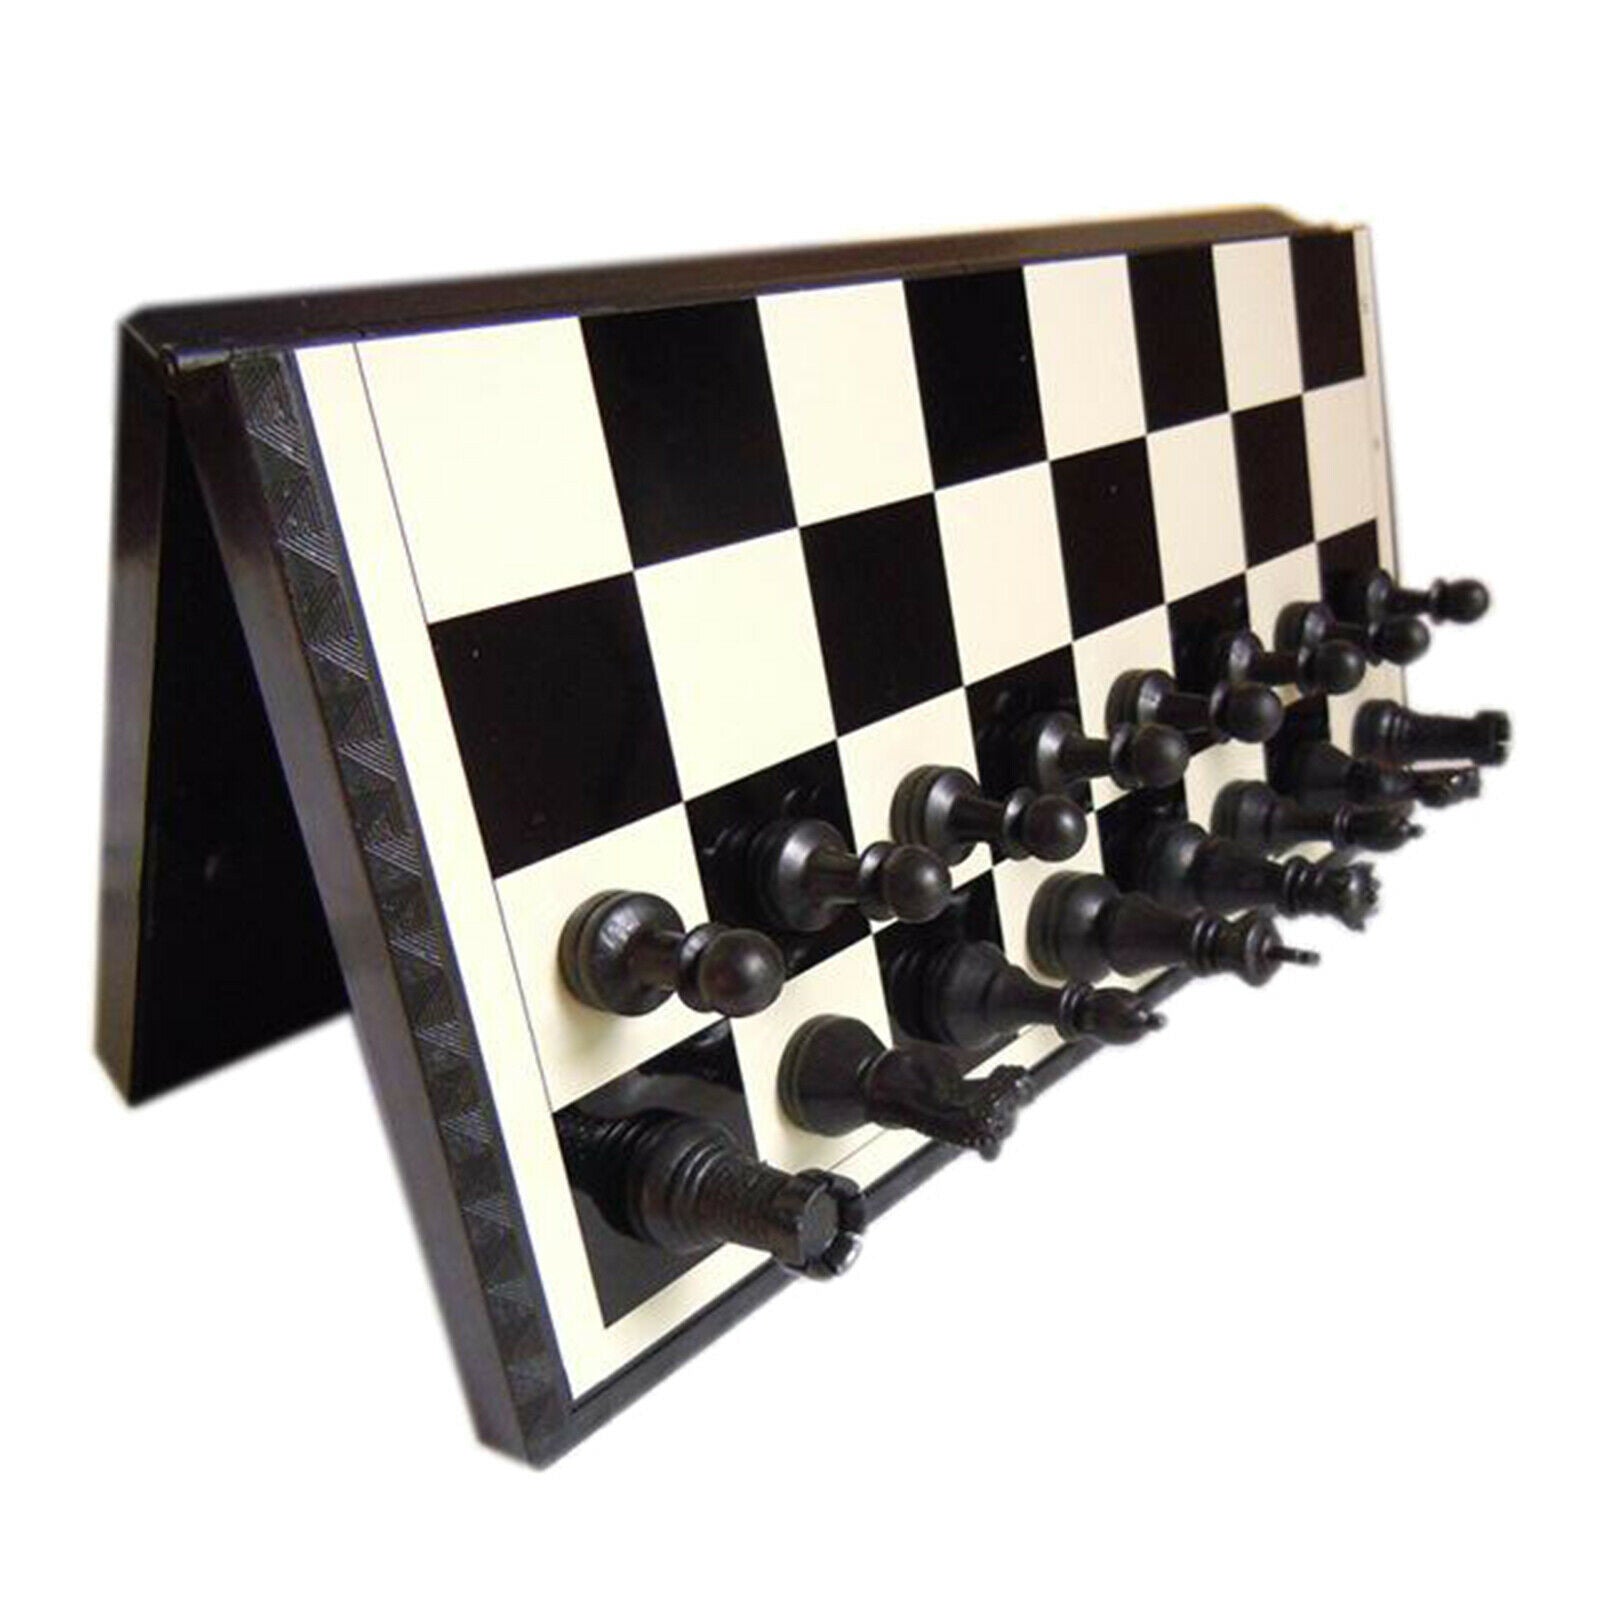 Classic International Chess Set Magnetic Chess Board Game Well-crafted 32 Pieces